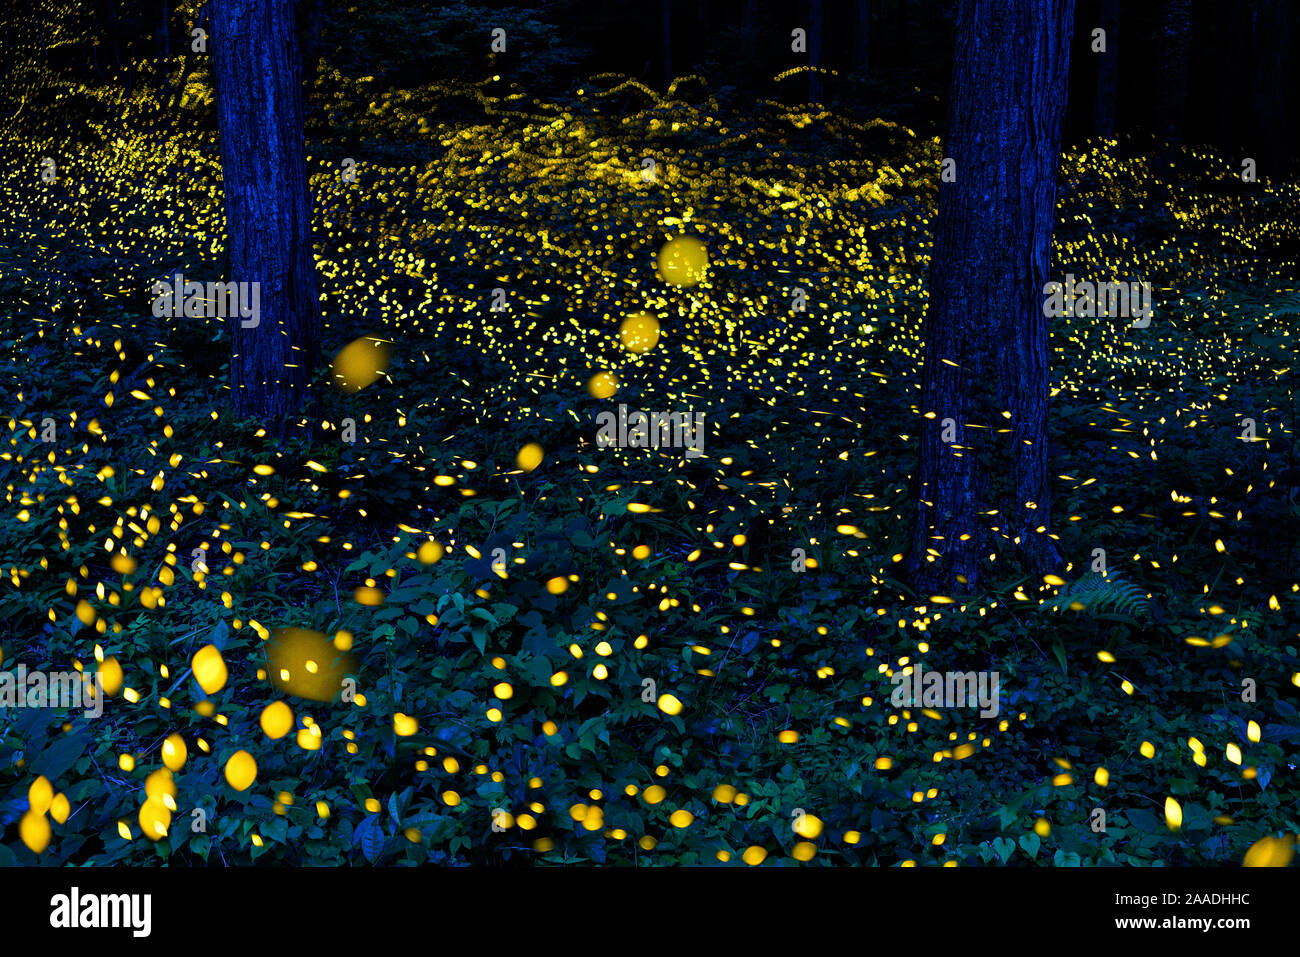 A composite image showing hundreds of fireflies flashing at night